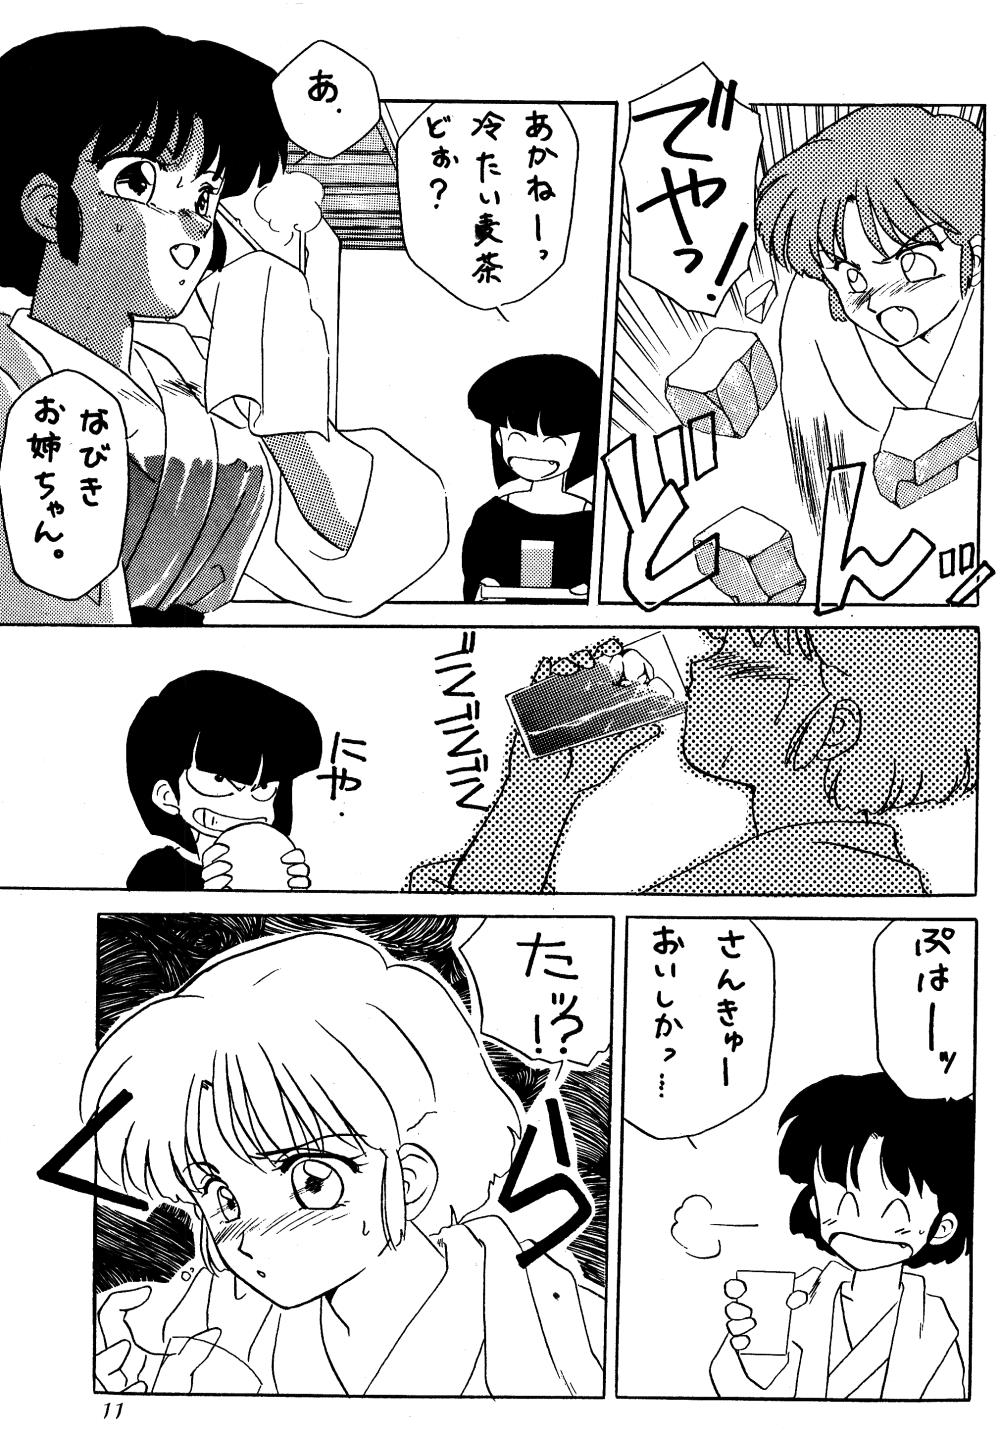 Curious W-Melon - Ranma 12 Hairy - Page 10